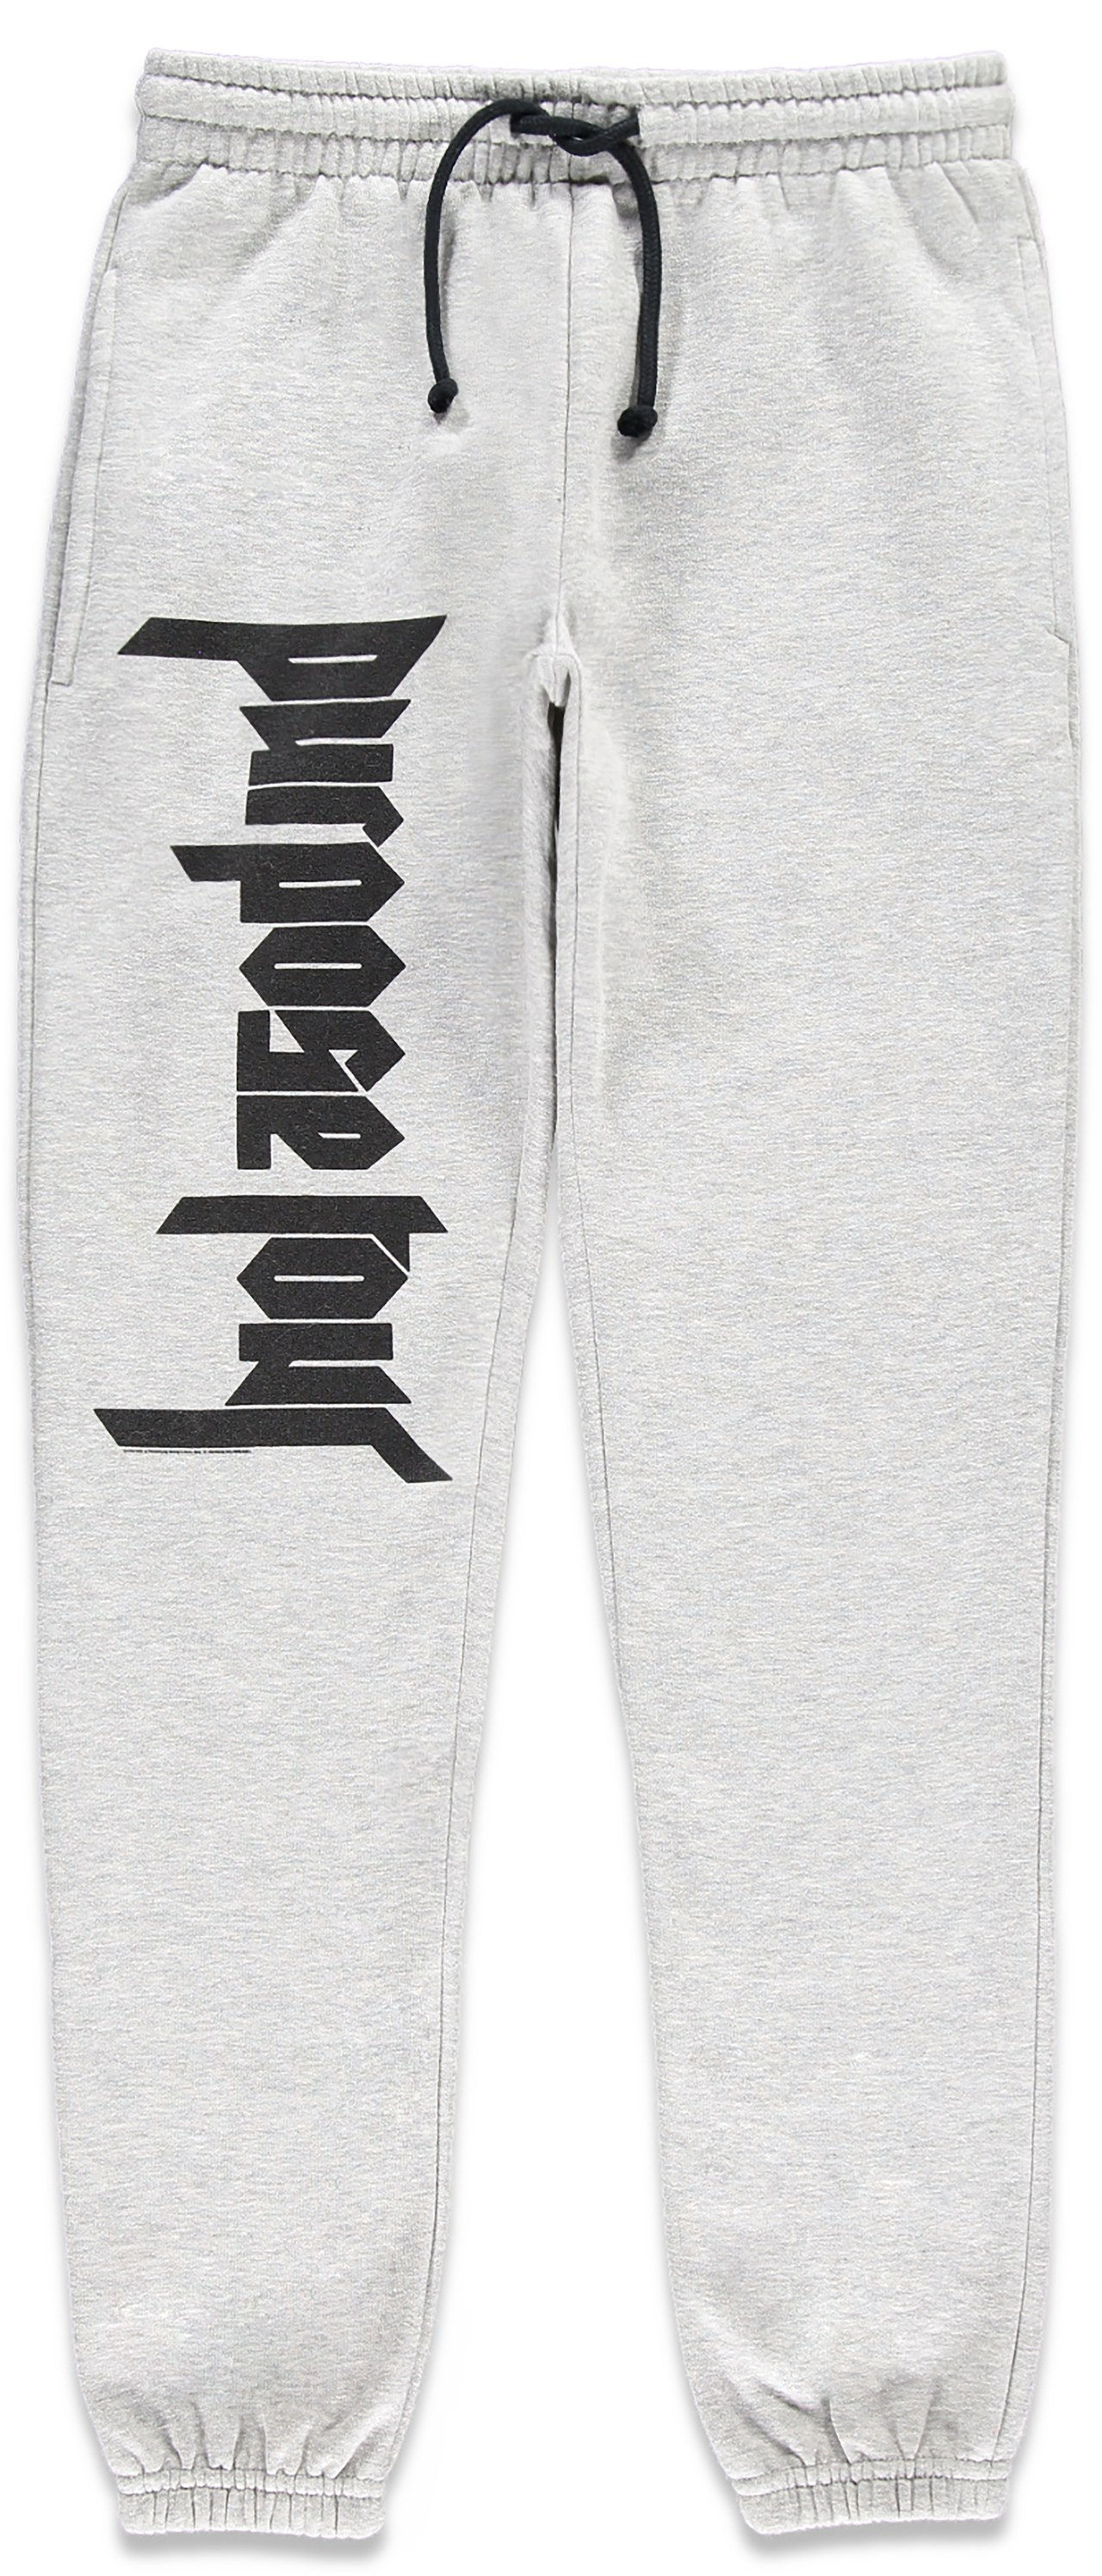 Sweatpants, [$23](http://www.forever21.com/Product/Product.aspx?BR=f21&Category=promo-purpose-tour&ProductID=2000231608&VariantID=011)